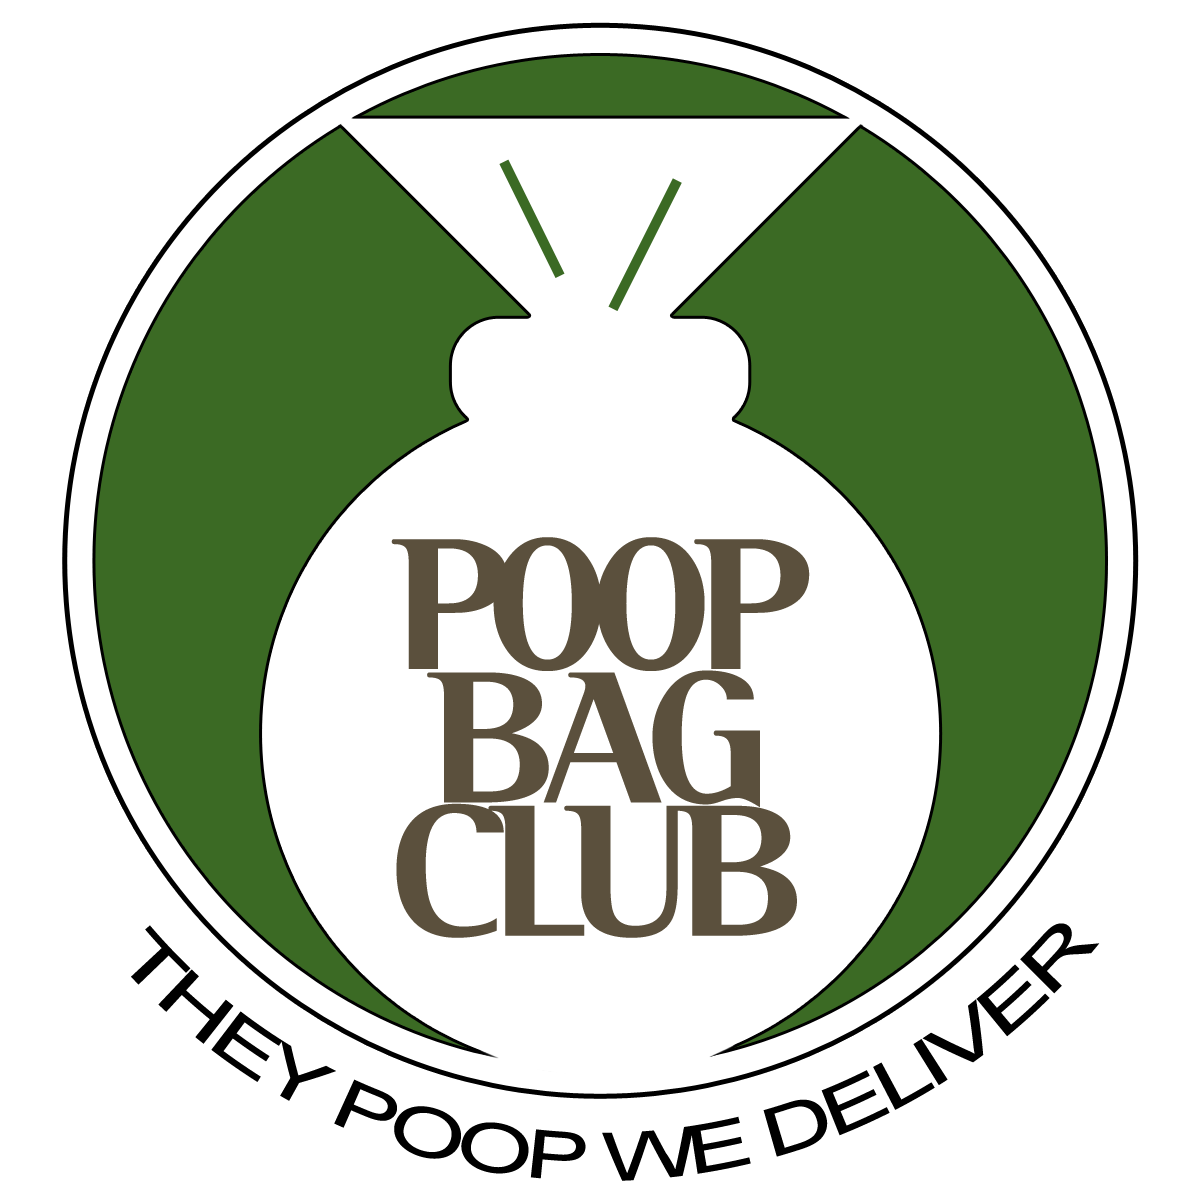 Images of poop clipart 4